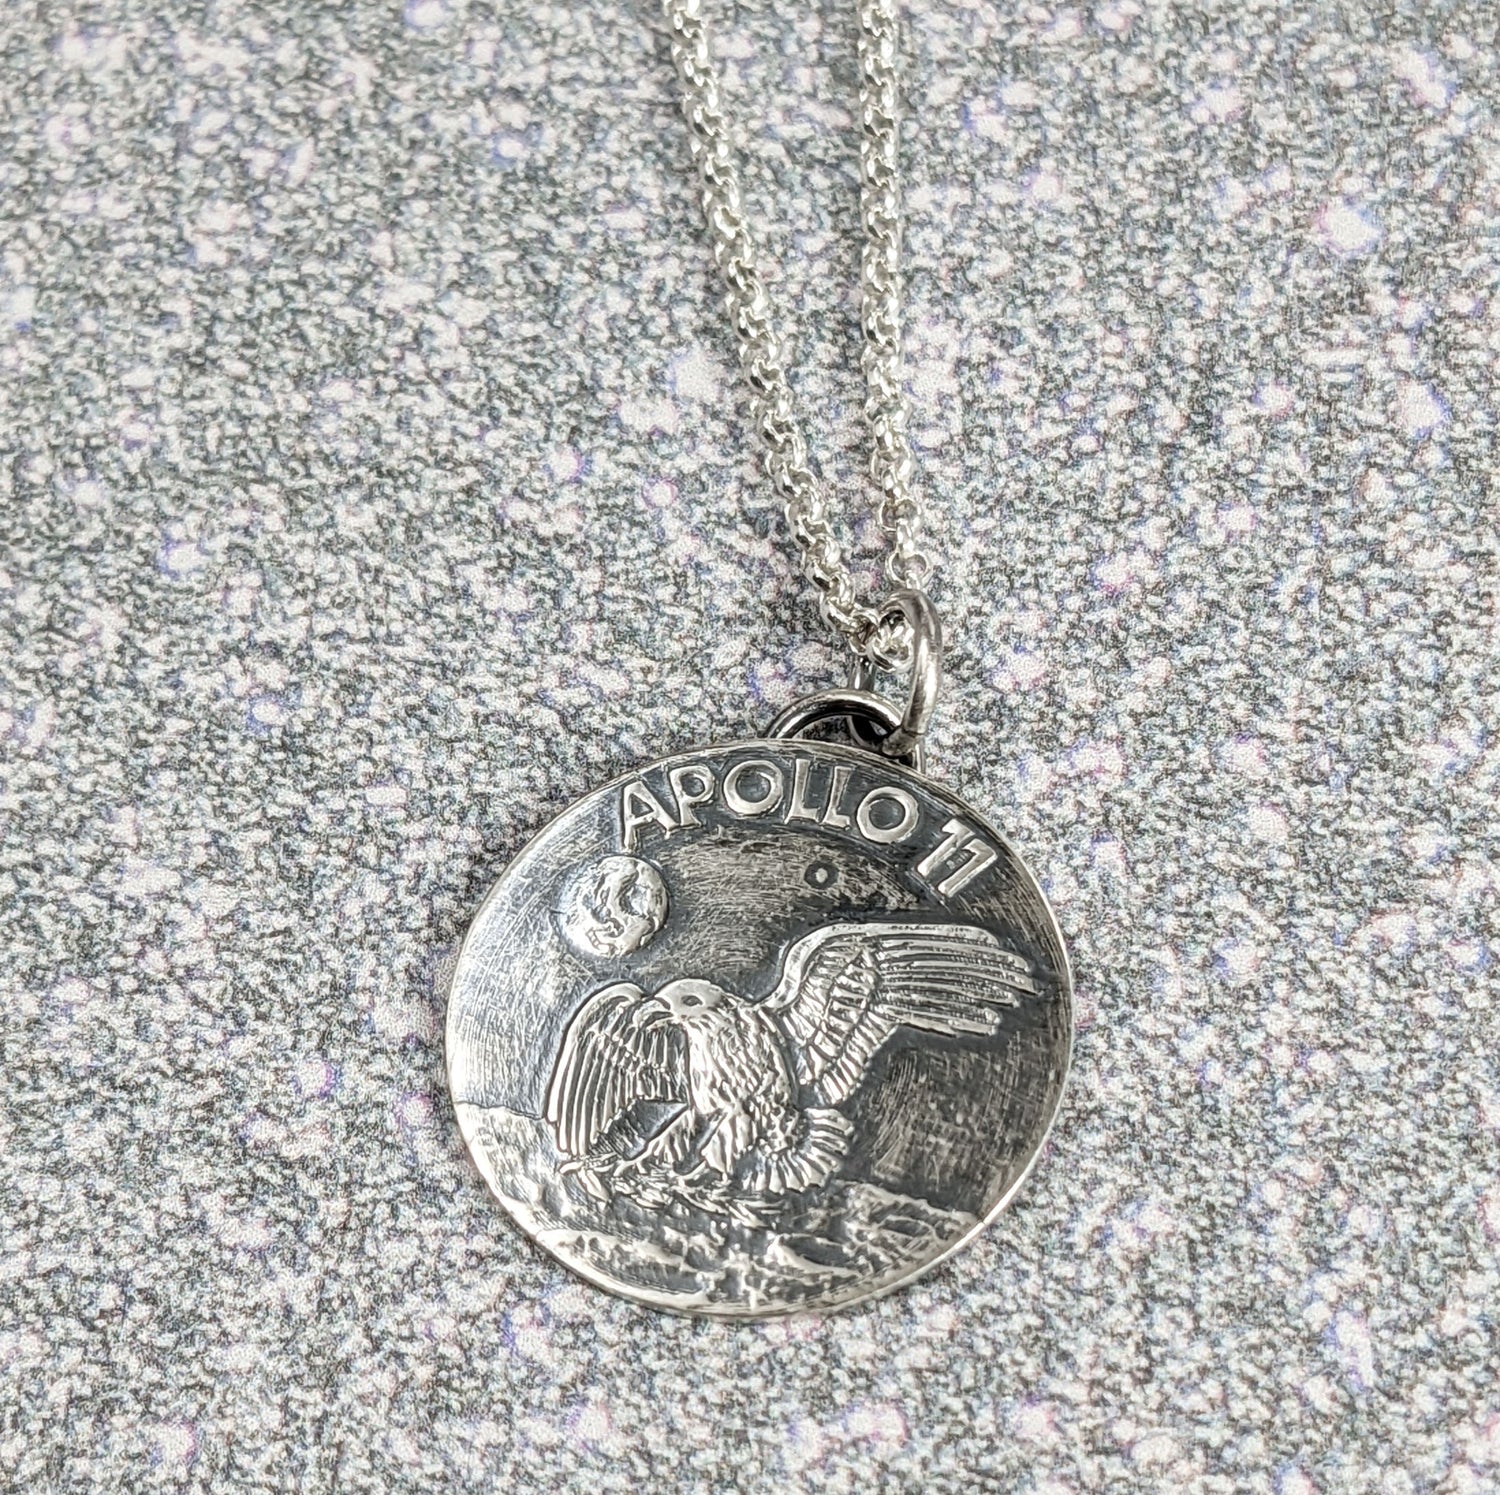 Handmade sterling silver pendant necklace signifying the landing of lunar module Eagle on the moon. The words Apollo 11 are in the background above the earth, and an eagle is approaching the moon surface.